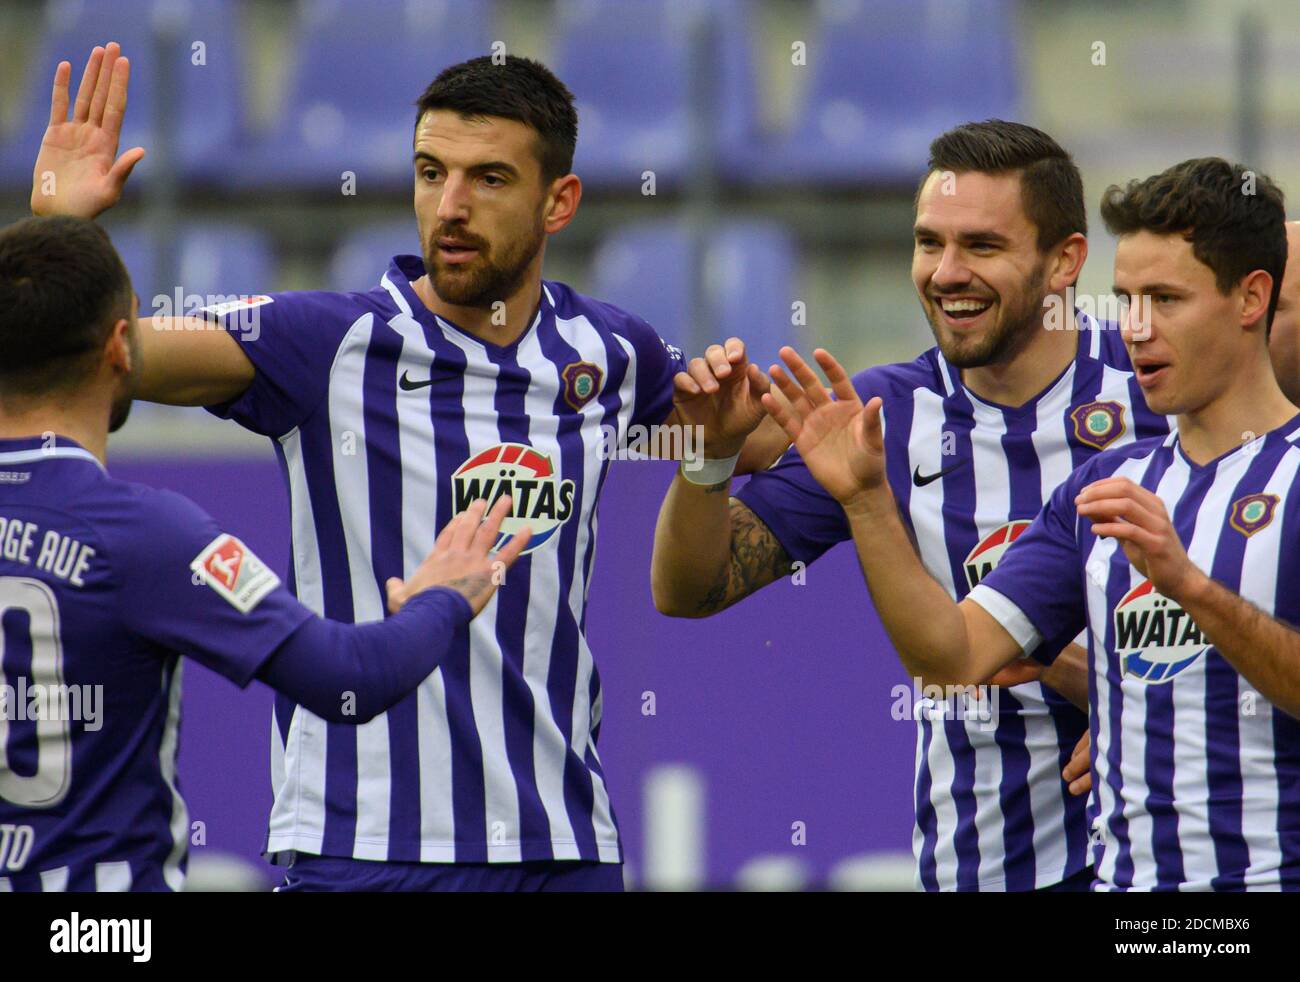 22 November 2020, Saxony, Aue: Football: 2nd Bundesliga, FC Erzgebirge Aue - SV Darmstadt 98, 8th matchday, at the Erzgebirgsstadion. Aues Pascal Testroet (3rd from left) cheers after his goal for 1:0 with Calogero Rizzuto (l-r), Ognjen Gnjatic and Clemens Fandrich. Photo: Robert Michael/dpa-Zentralbild/dpa - IMPORTANT NOTE: In accordance with the regulations of the DFL Deutsche Fußball Liga and the DFB Deutscher Fußball-Bund, it is prohibited to exploit or have exploited in the stadium and/or from the game taken photographs in the form of sequence images and/or video-like photo series. Stock Photo